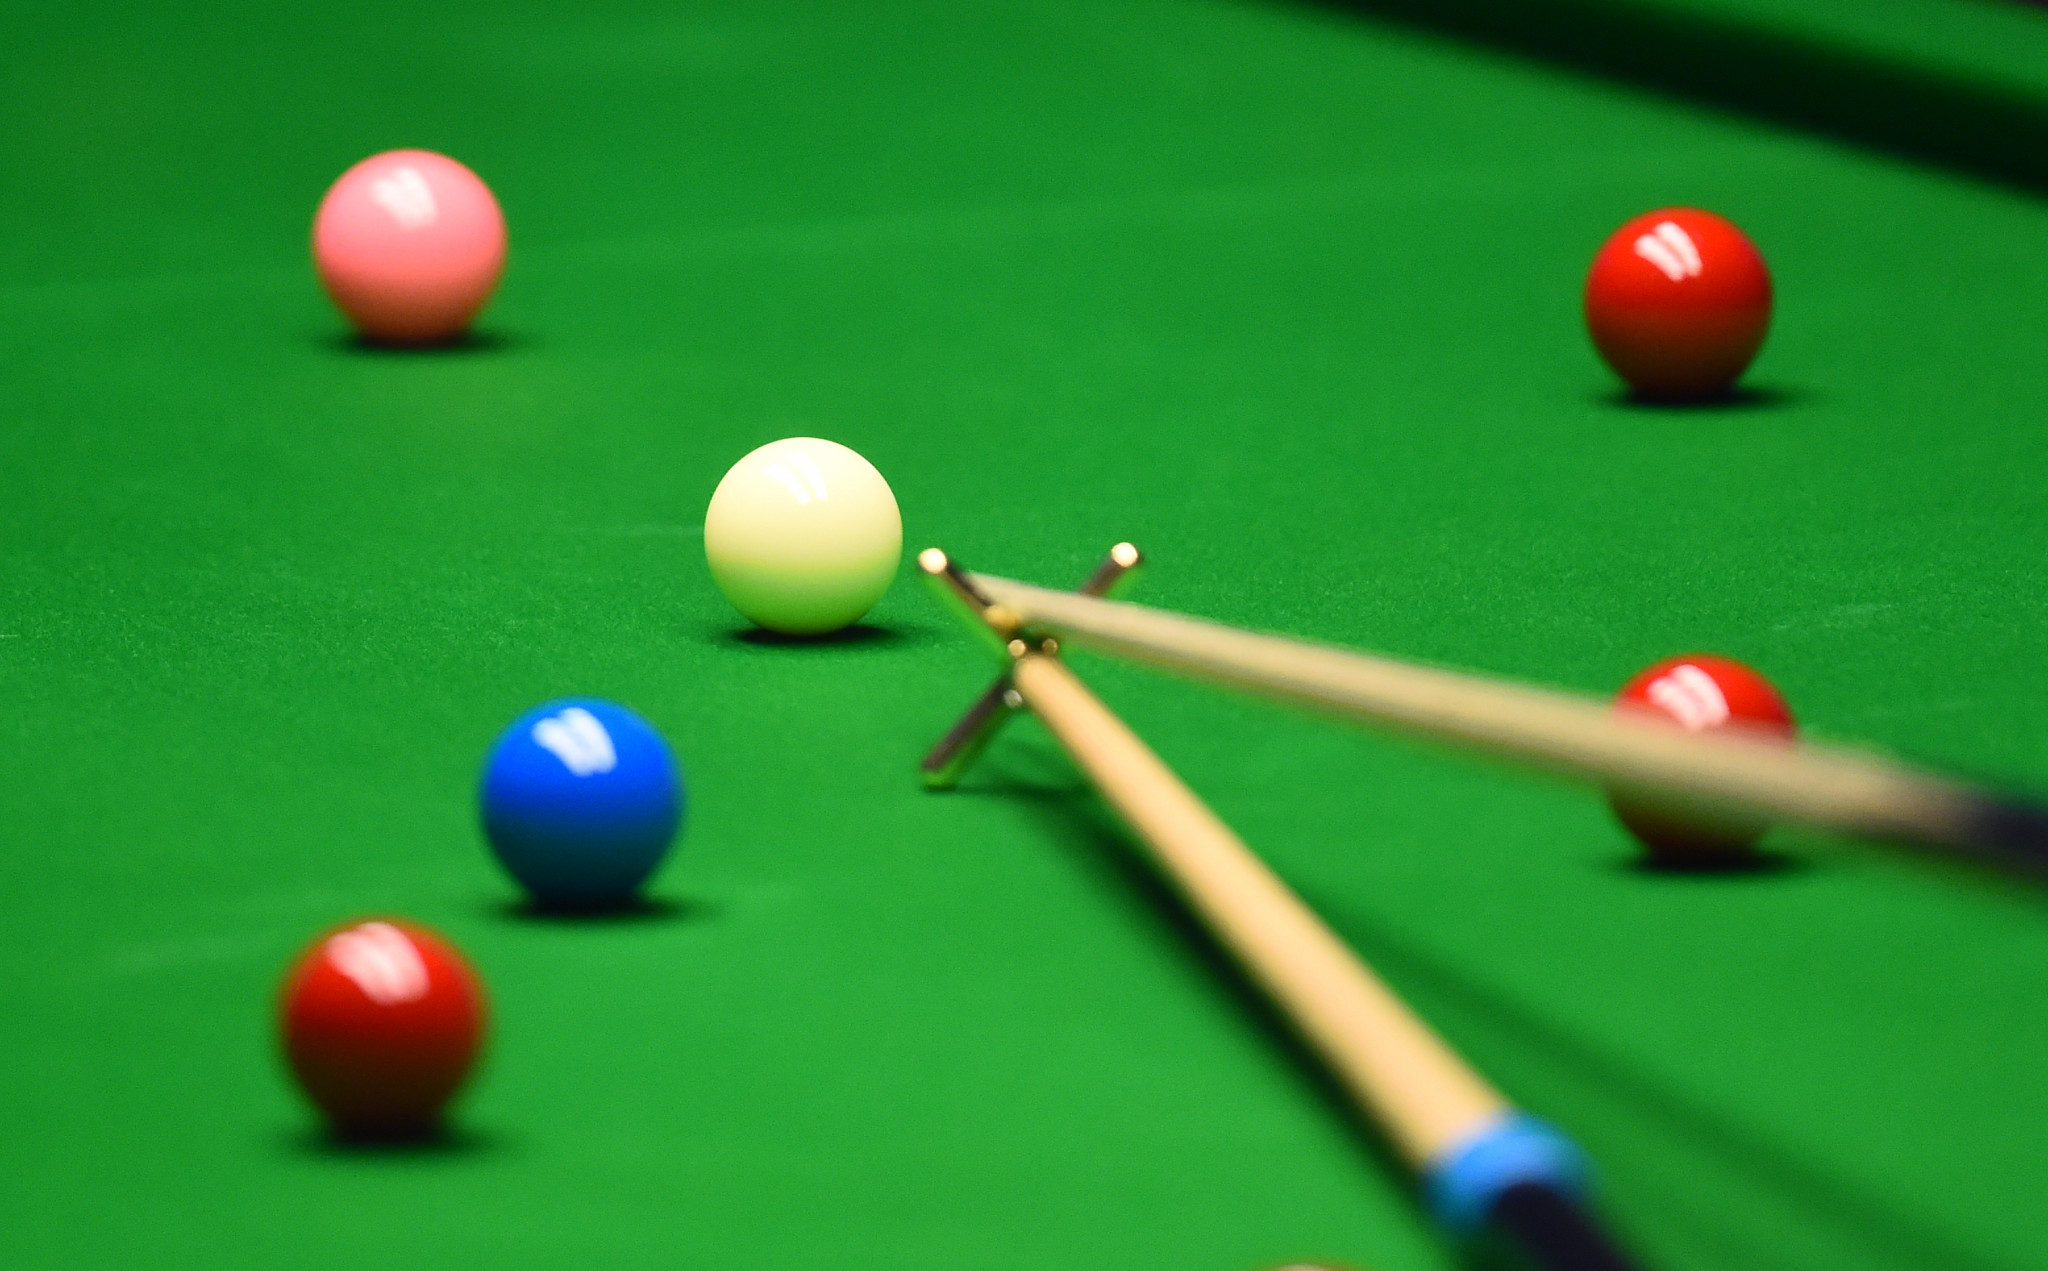 Snooker could return to England in July ©Getty Images